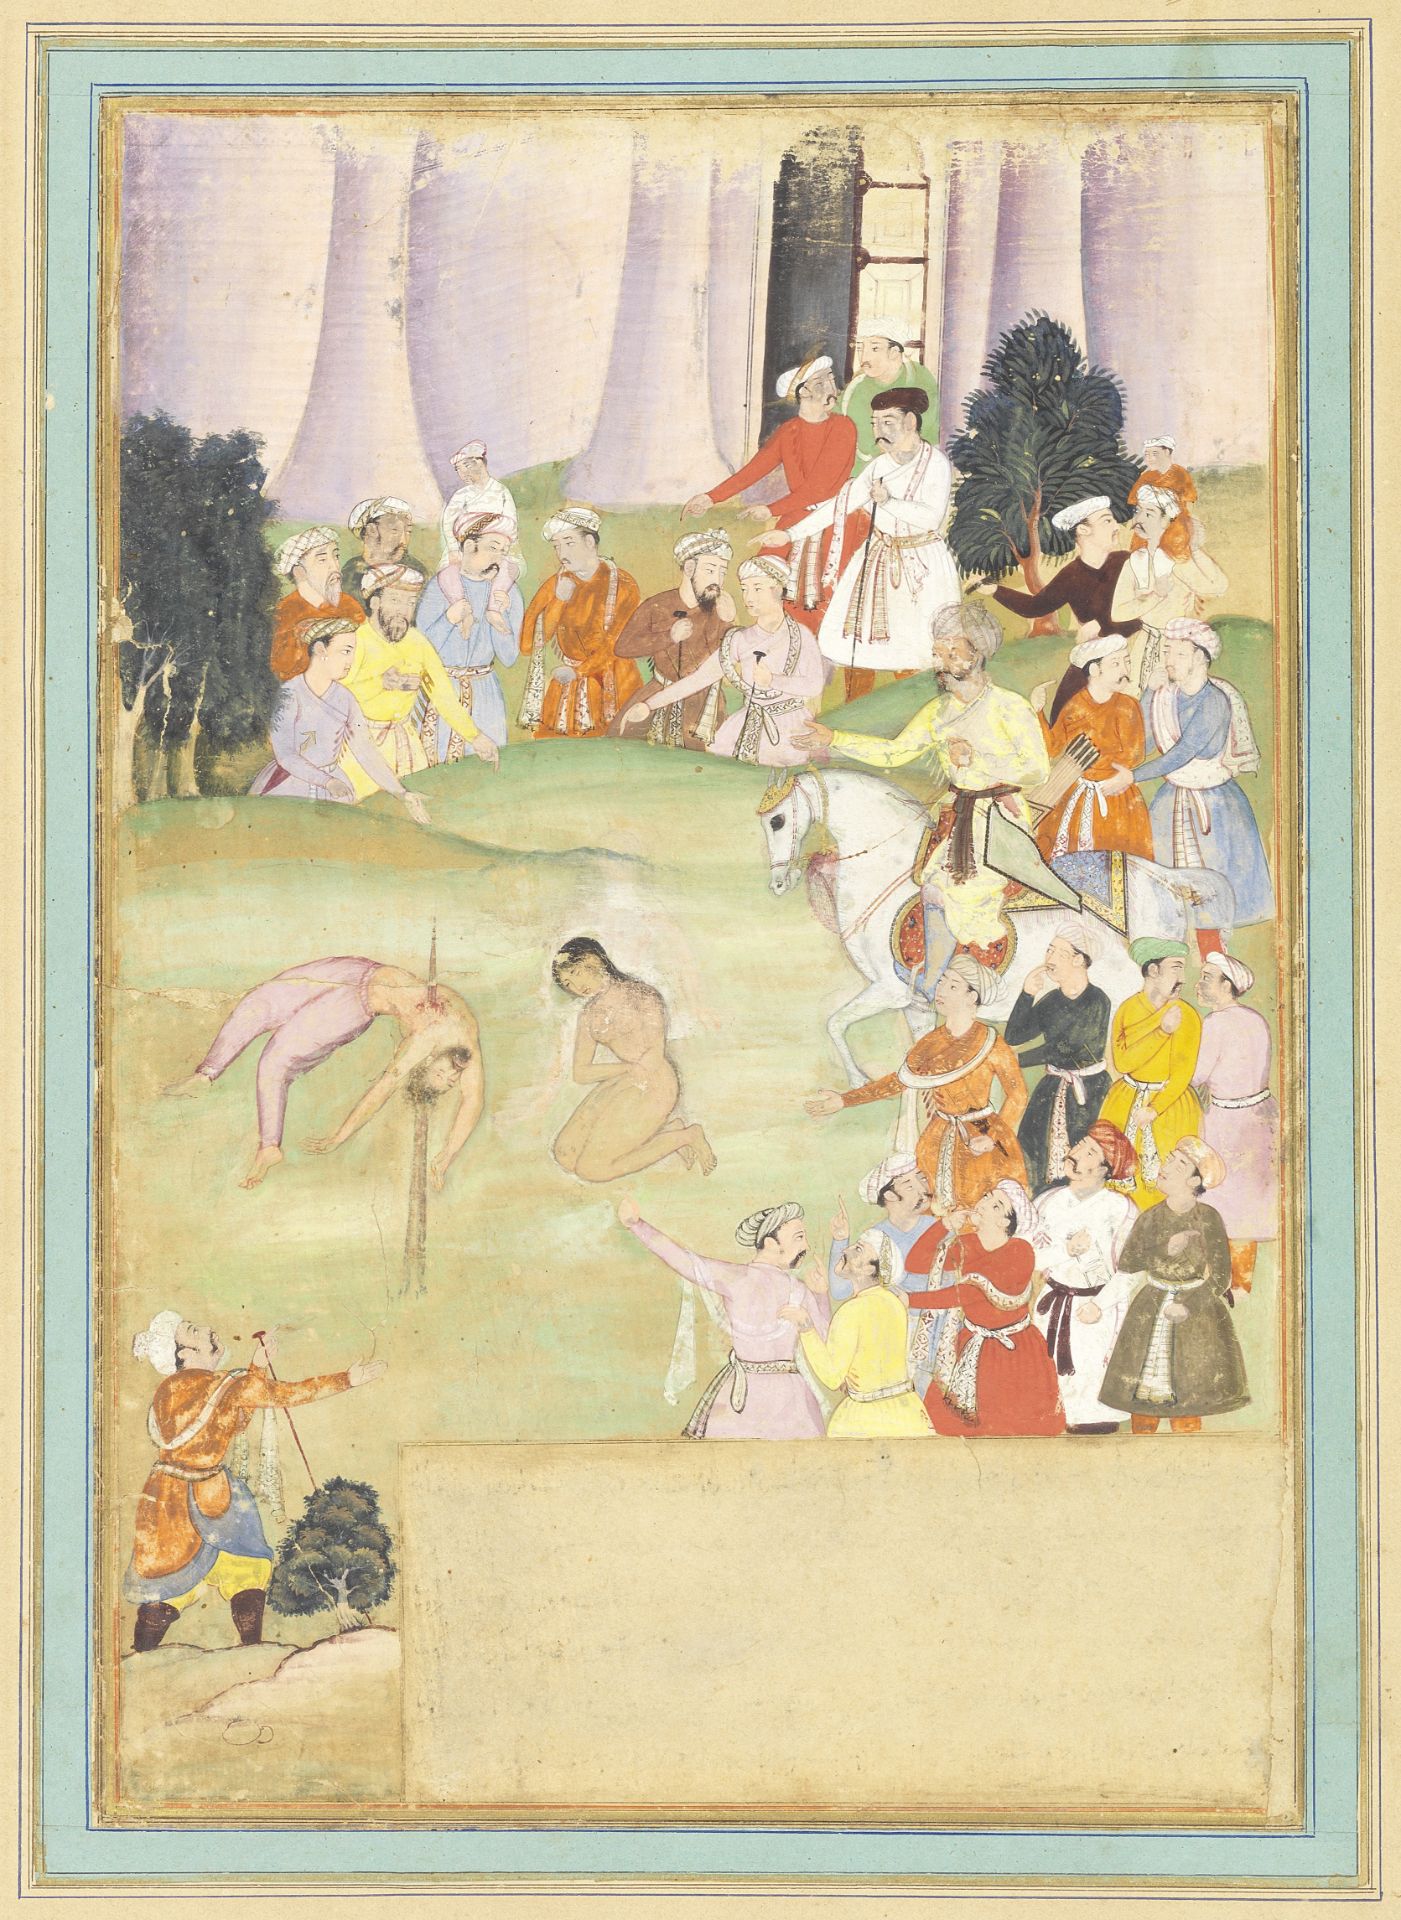 A scene depicting a ruler overseeing the execution of an offender Mughal, circa 1600